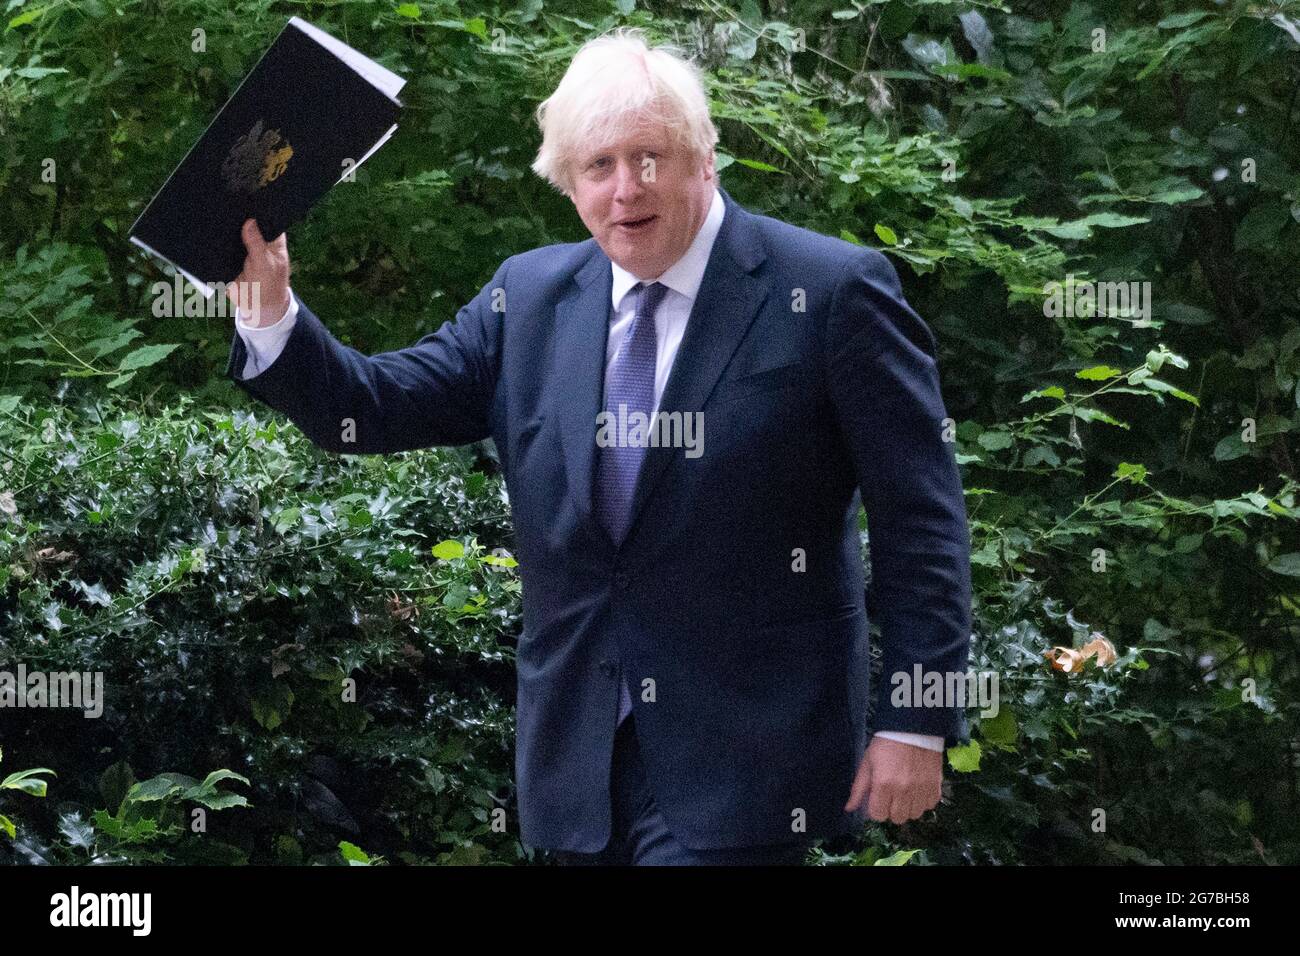 London, Britain. 12th July, 2021. British Prime Minister Boris Johnson walks back to Downing Street after attending a press conference in London, Britain, on July 12, 2021. The British government confirmed Monday that most COVID-19 restrictions in England will end next week despite surging cases caused by the Delta variant first identified in India. Credit: Ray Tang/Xinhua/Alamy Live News Stock Photo